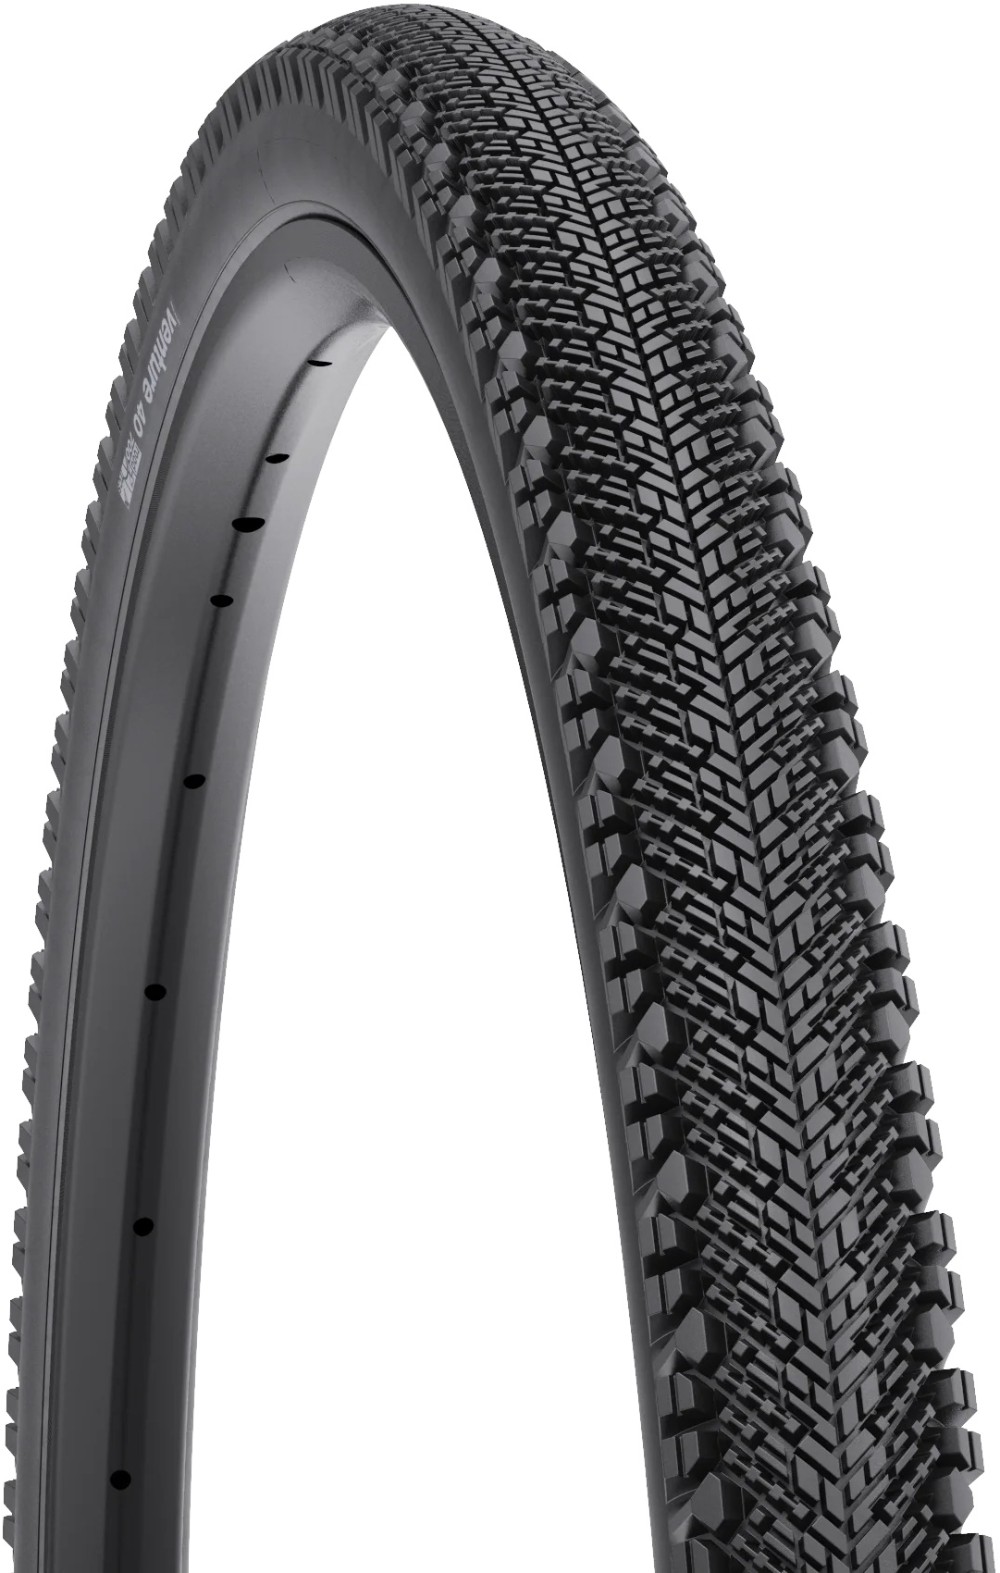 Venture TCS Light/Fast Rolling 60tpi Dual DNA 700c Tyre image 0